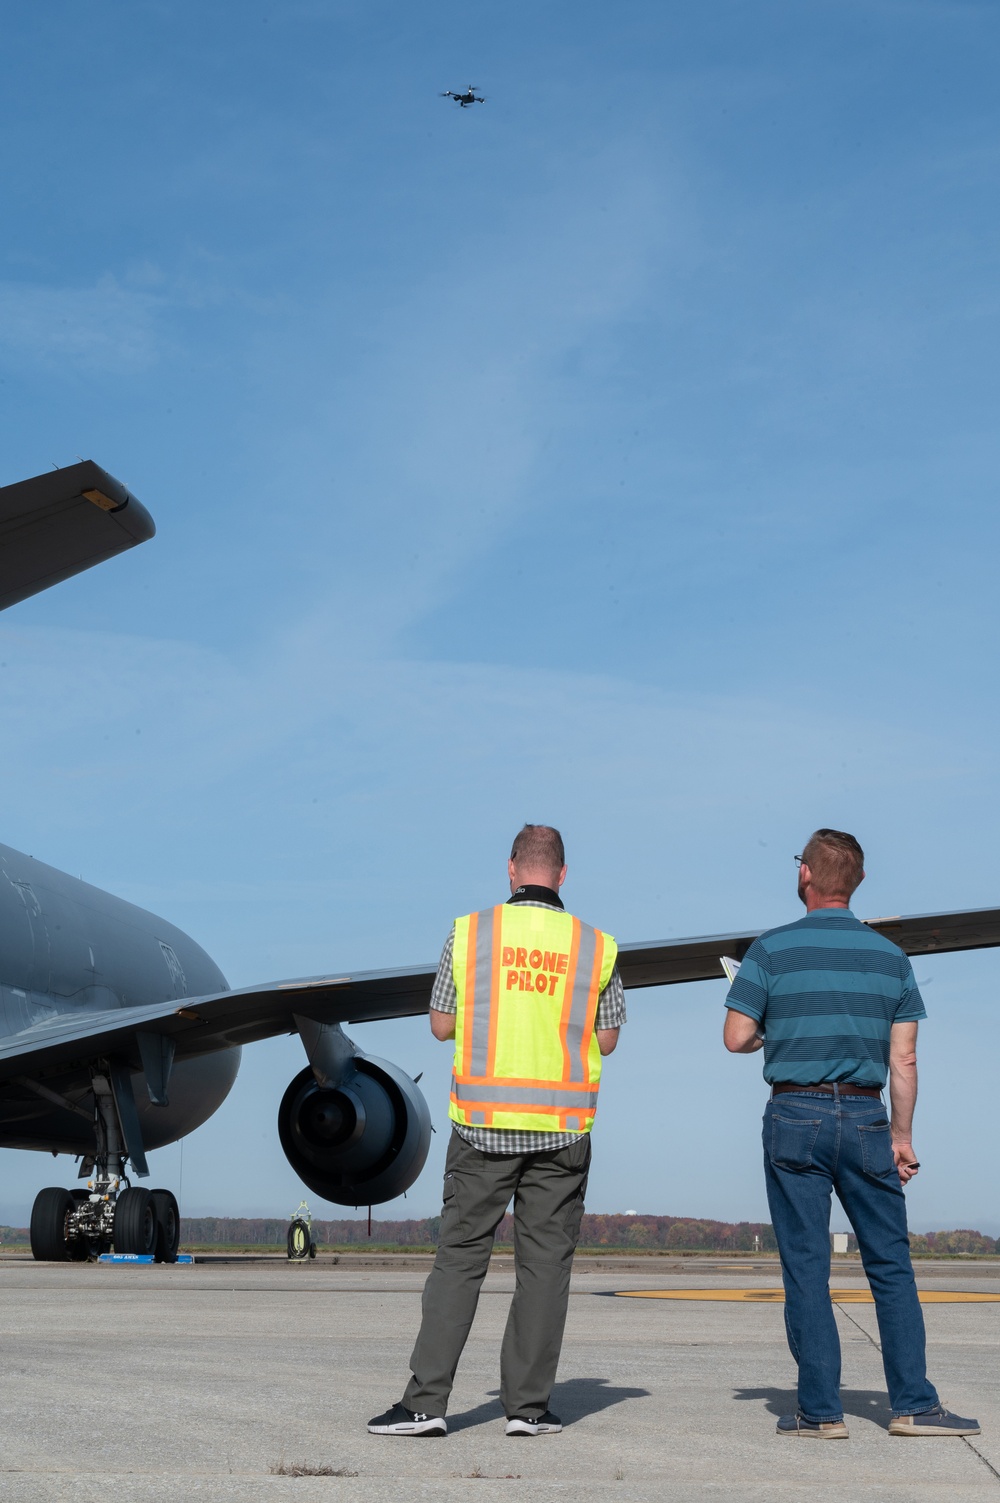 Eye in the sky: SUAS program takes flight at Dover AFB